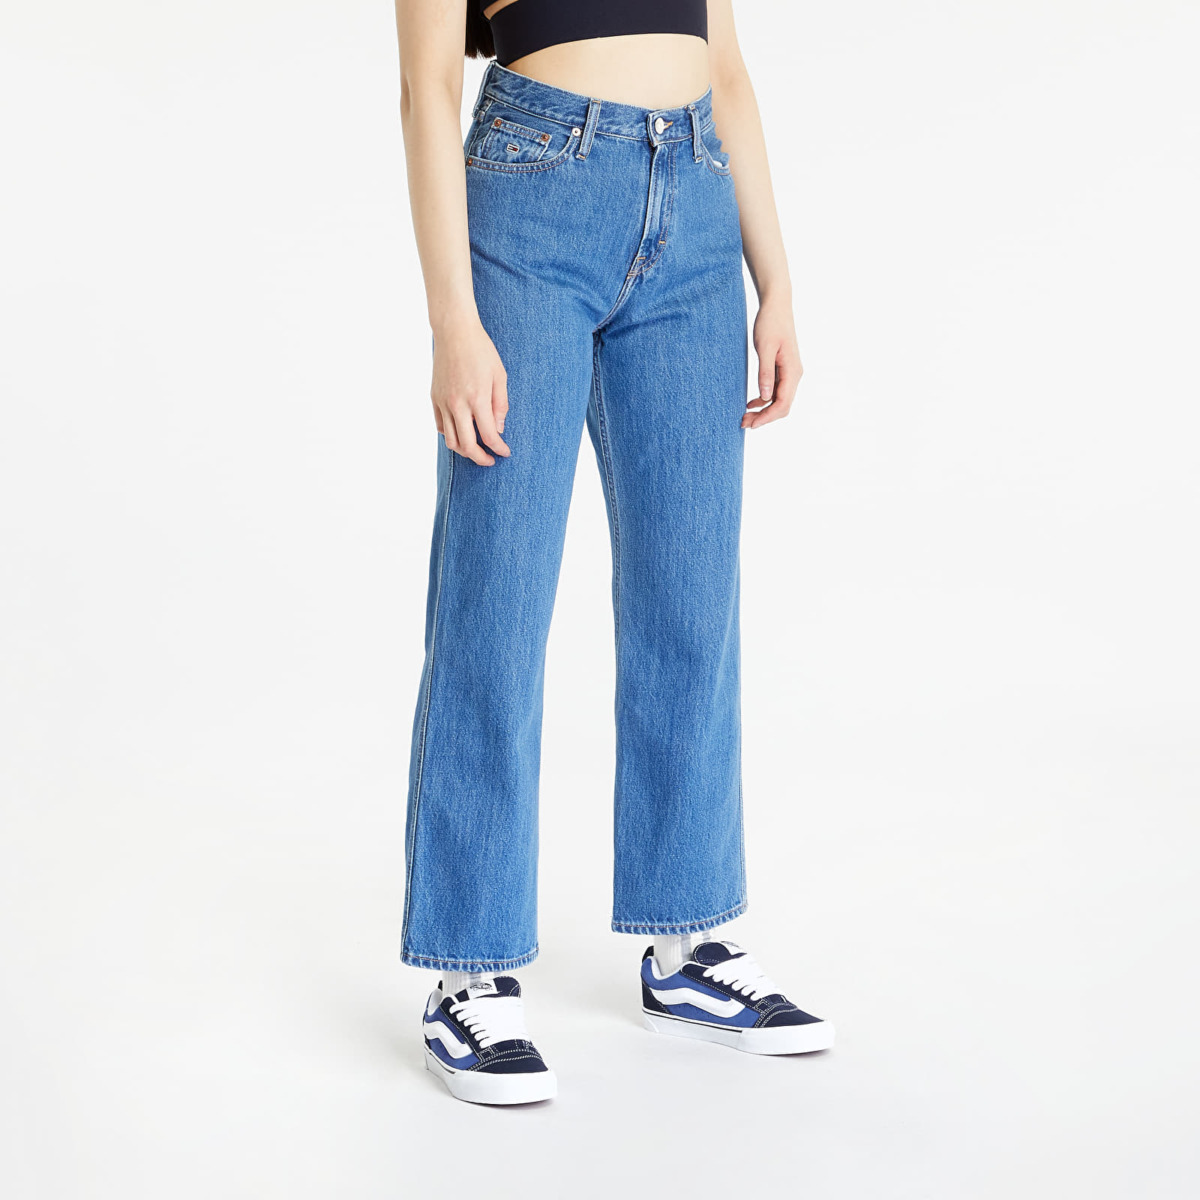 Tommy Hilfiger Blue Jeans for Women by Footshop GOOFASH